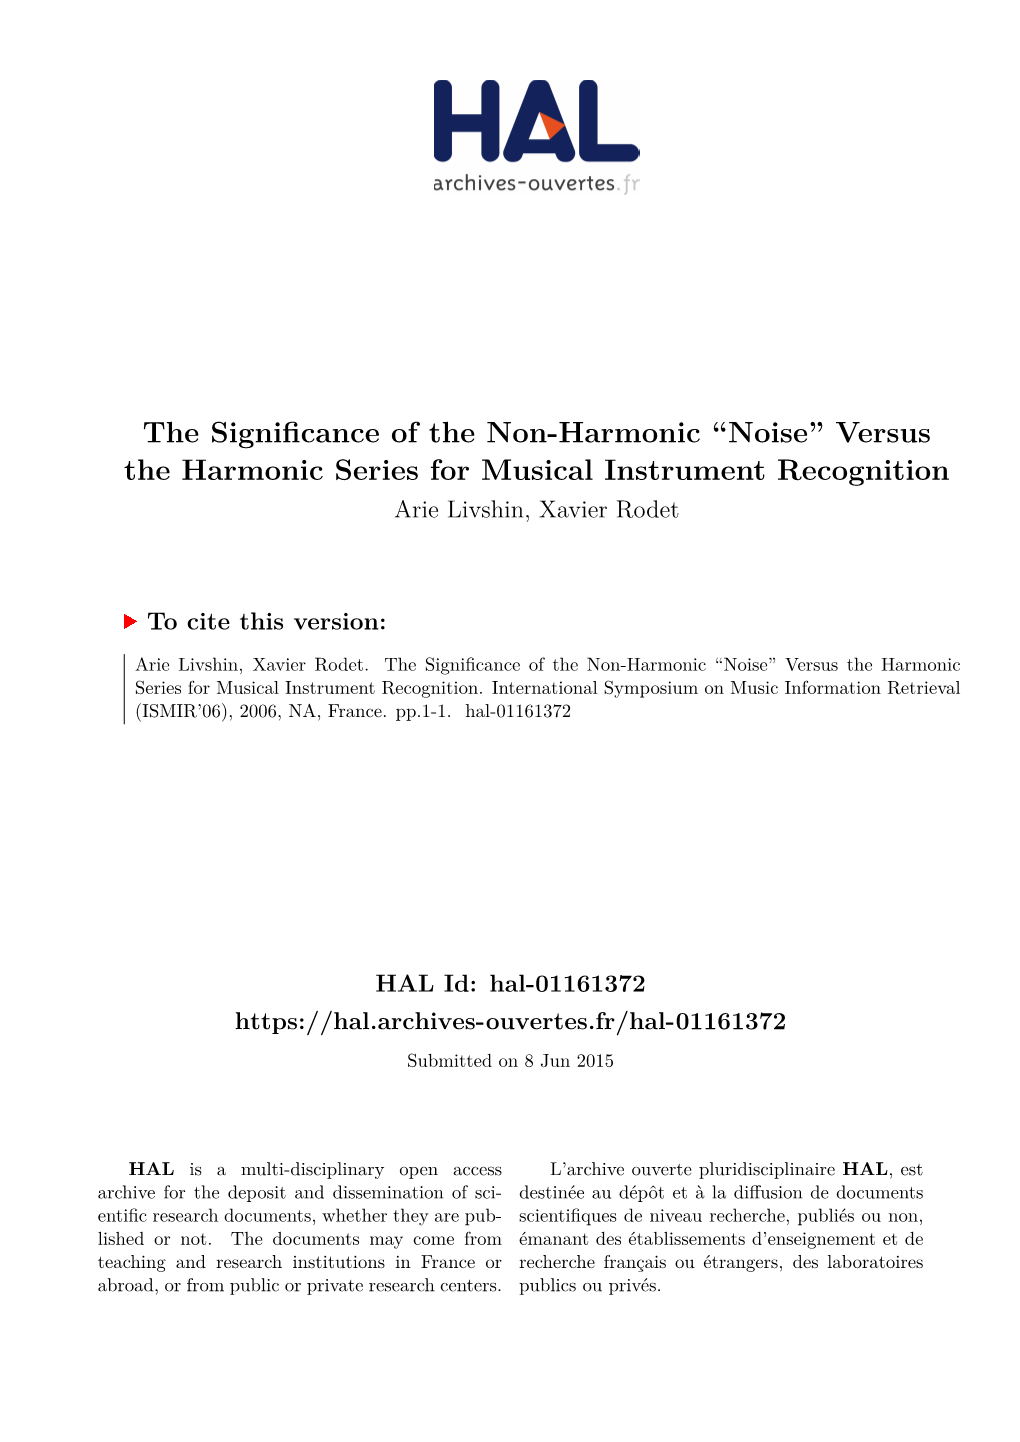 Noise'' Versus the Harmonic Series for Musical Instrument Recognition